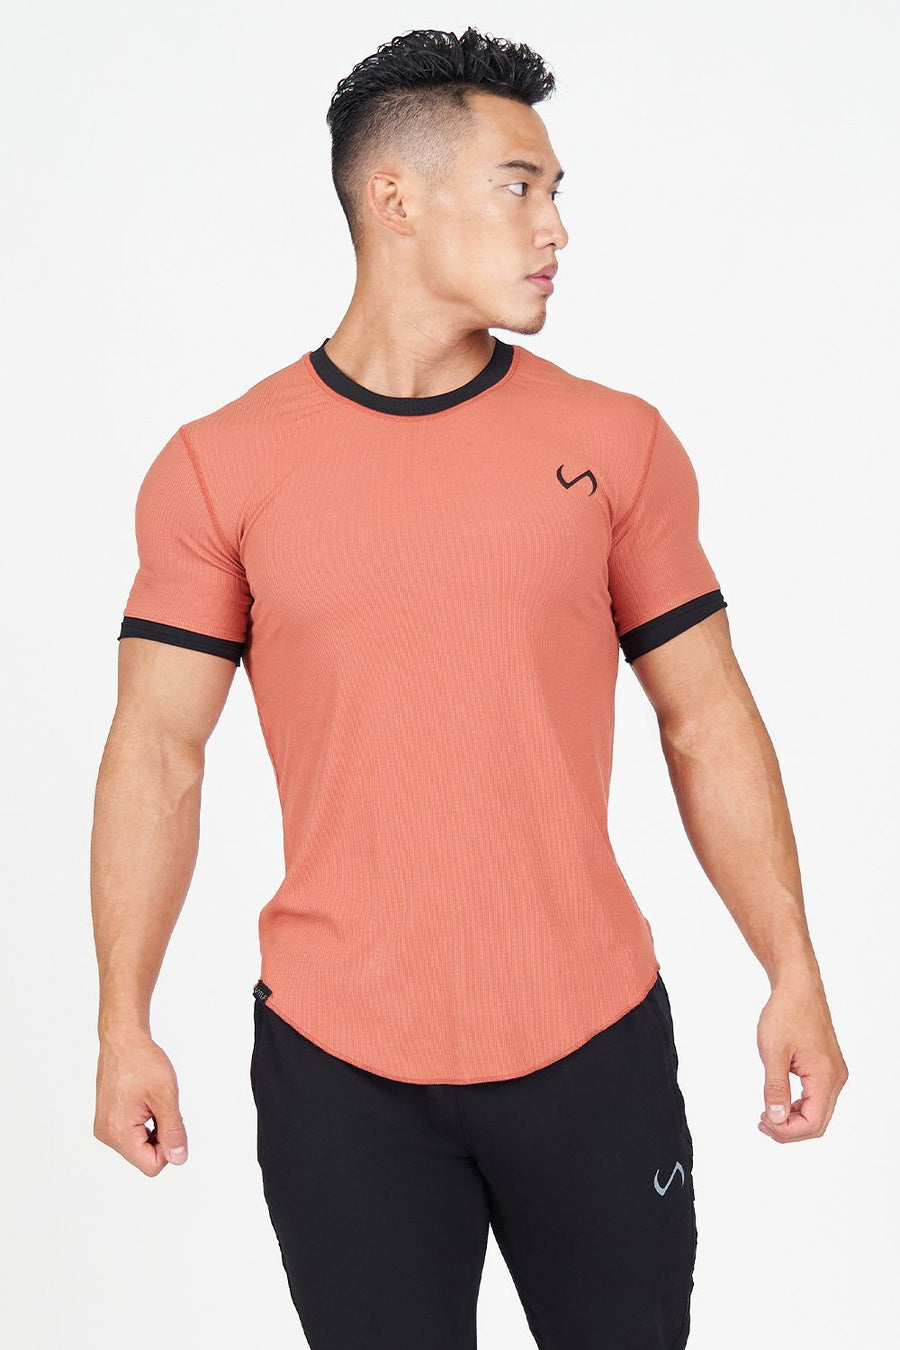 TLF Surge Classic Tee | Men's Ribbed Muscle Shirt - Red -1